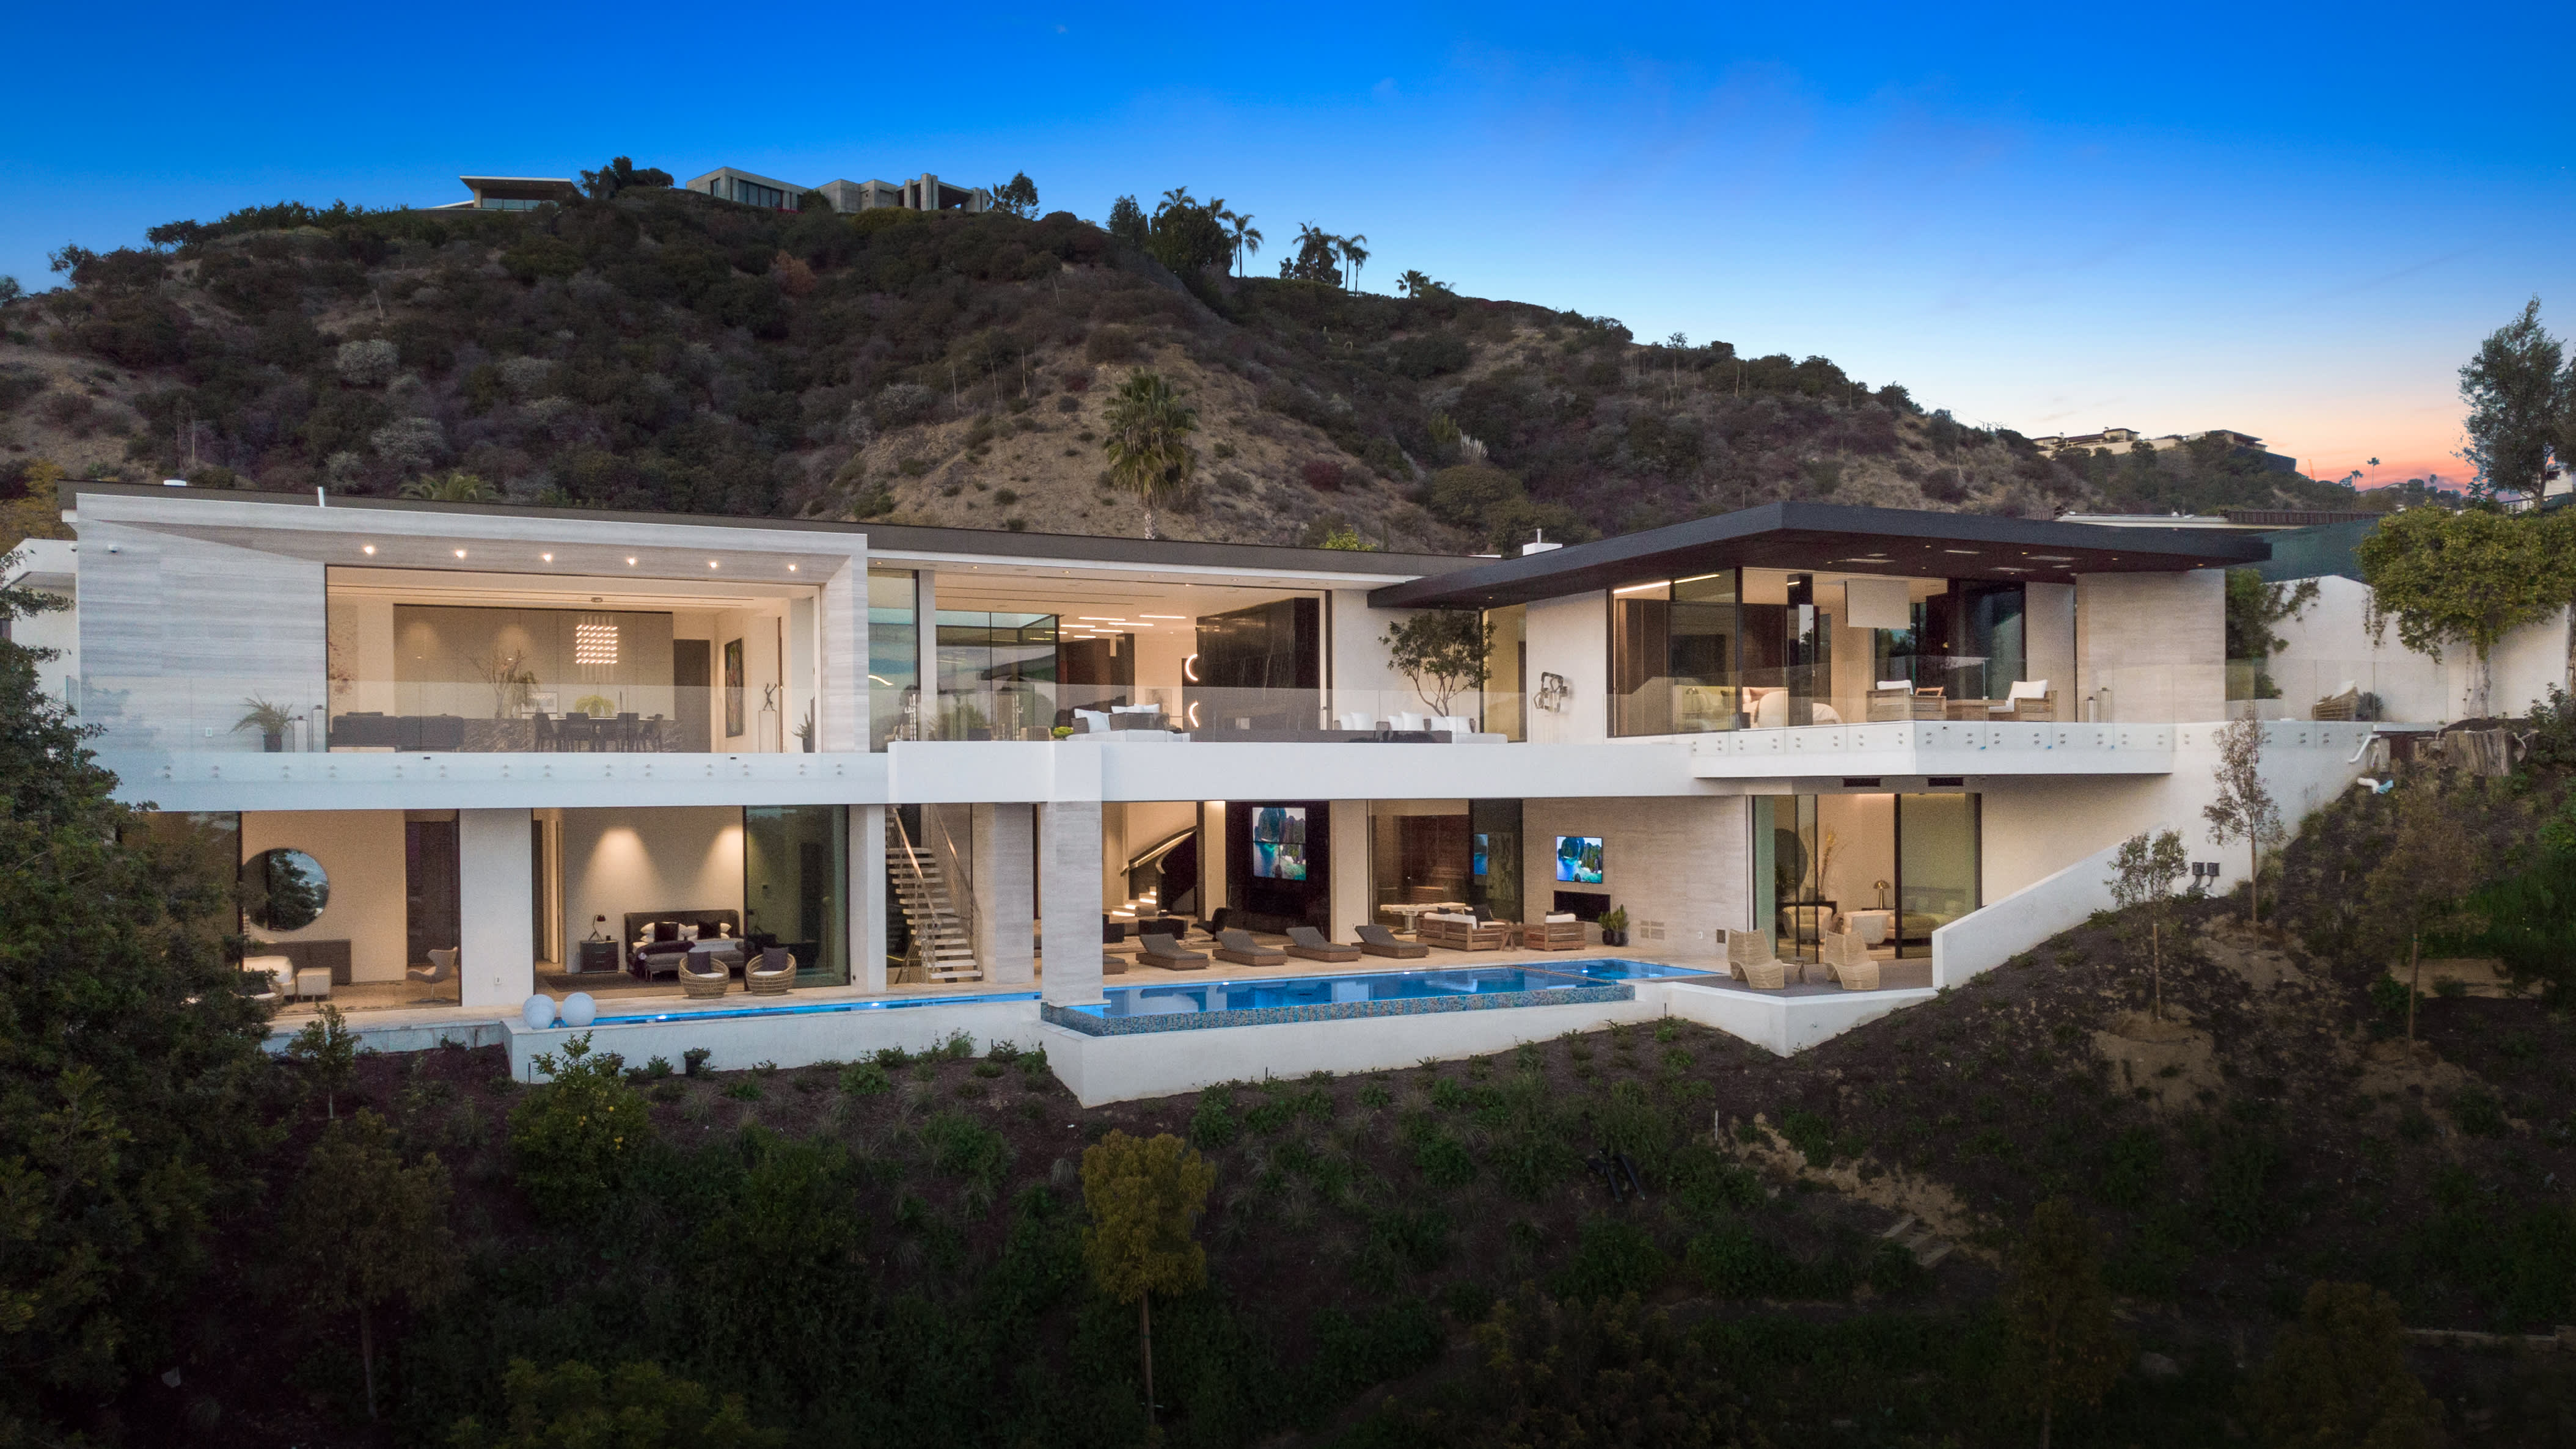 This million Beverly Hills mansion rose from a multimillion-dollar teardown